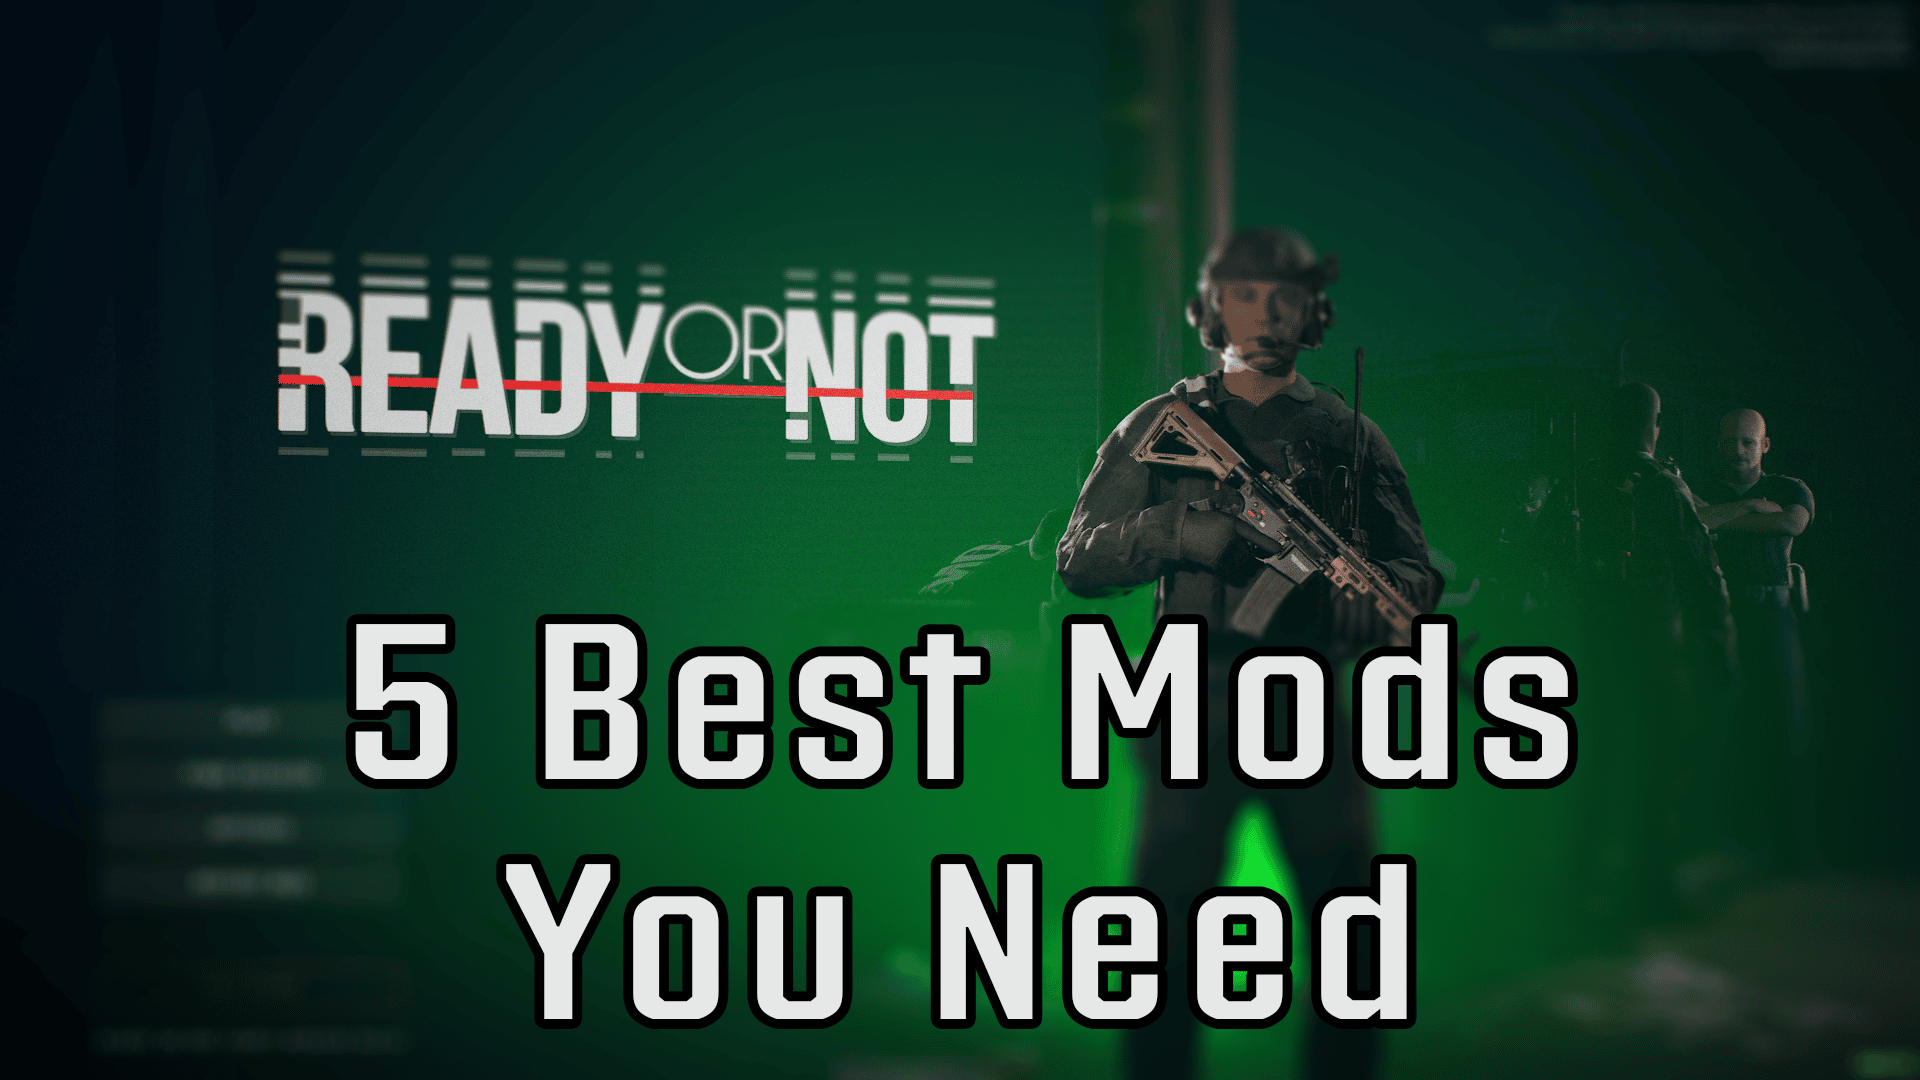 Ready or Not Best Mods